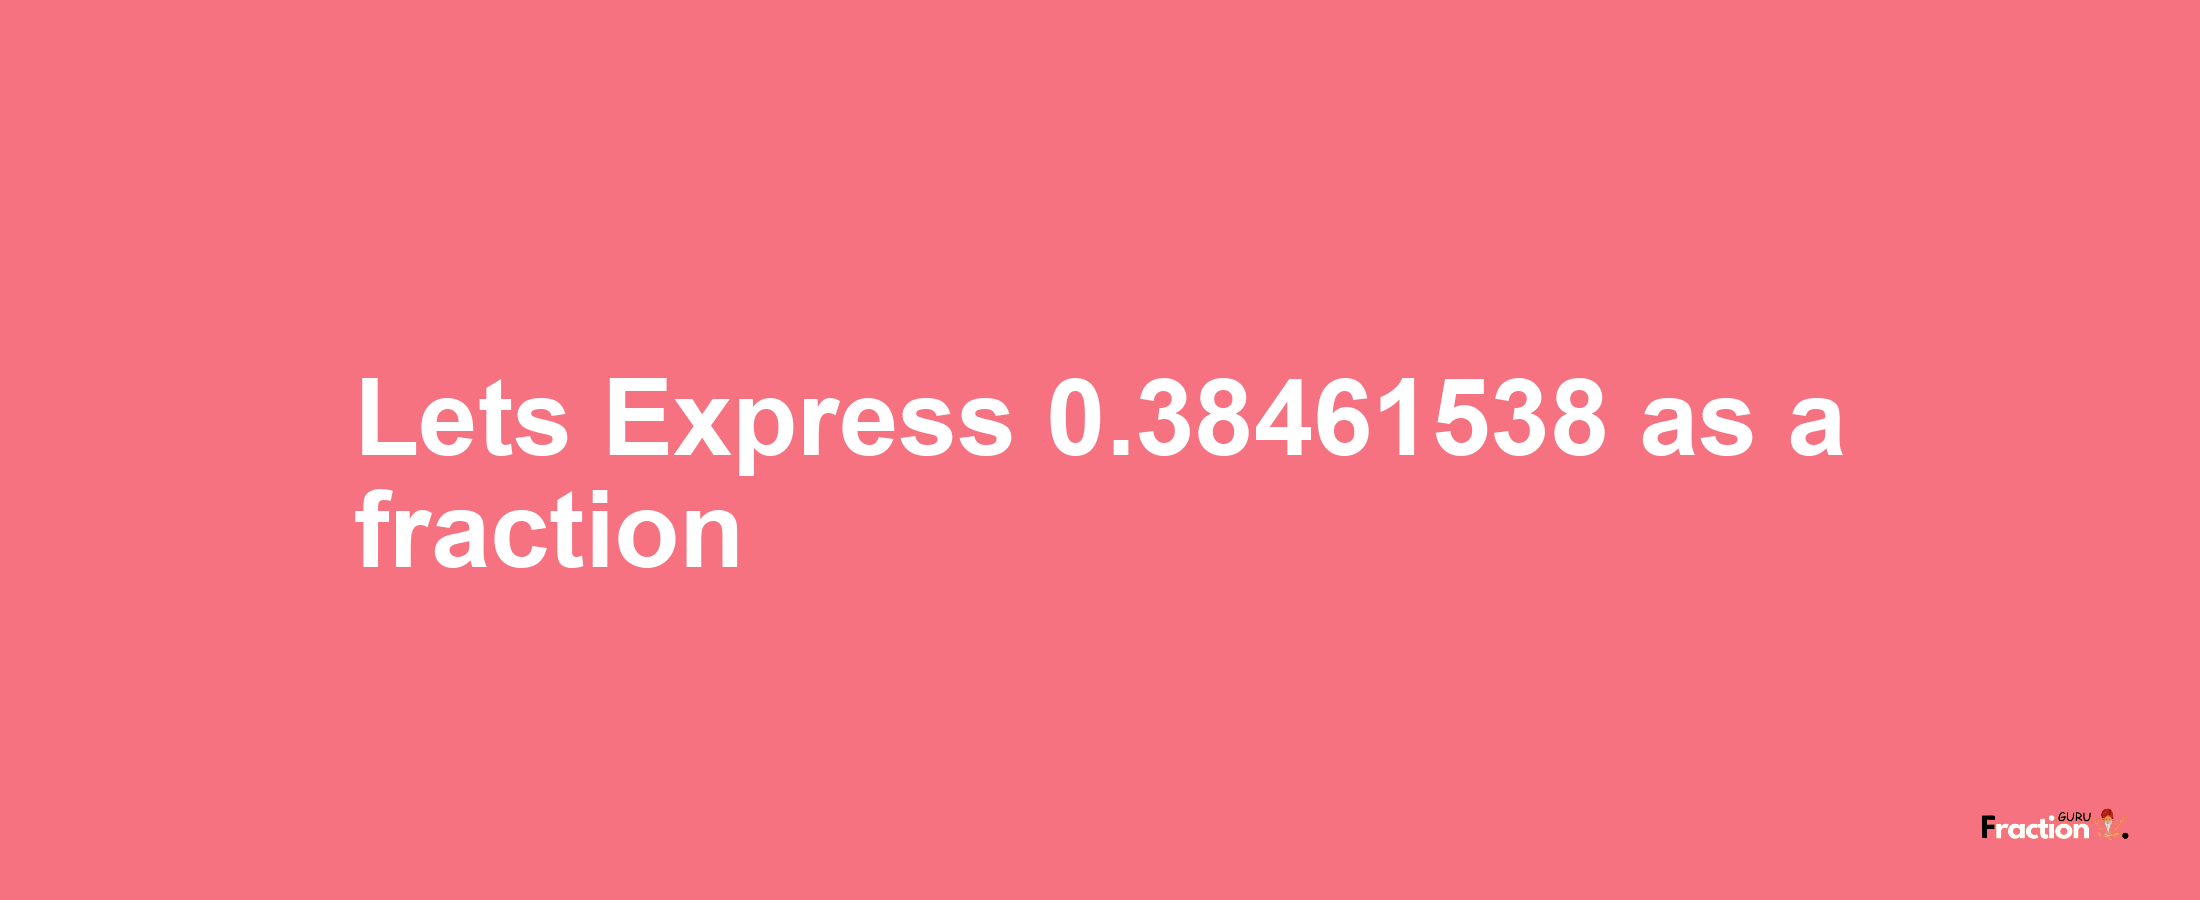 Lets Express 0.38461538 as afraction